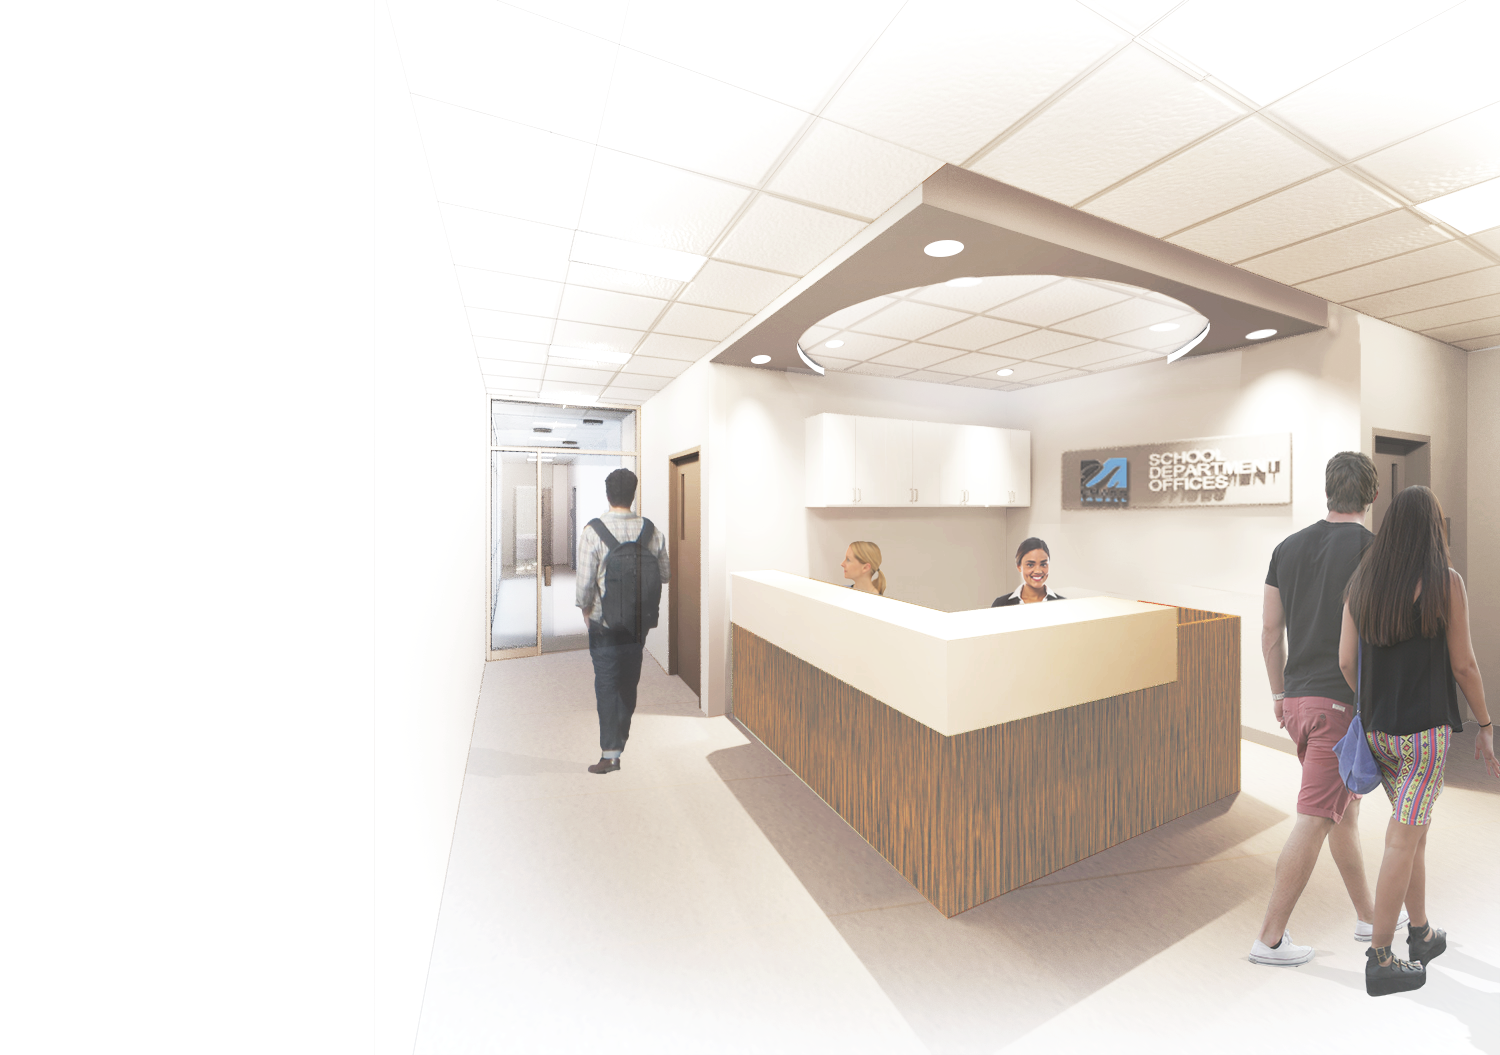 Interior, 3rd Floor Rendering of UMass Lowell's South Campus offices, reception area with people occupying the space